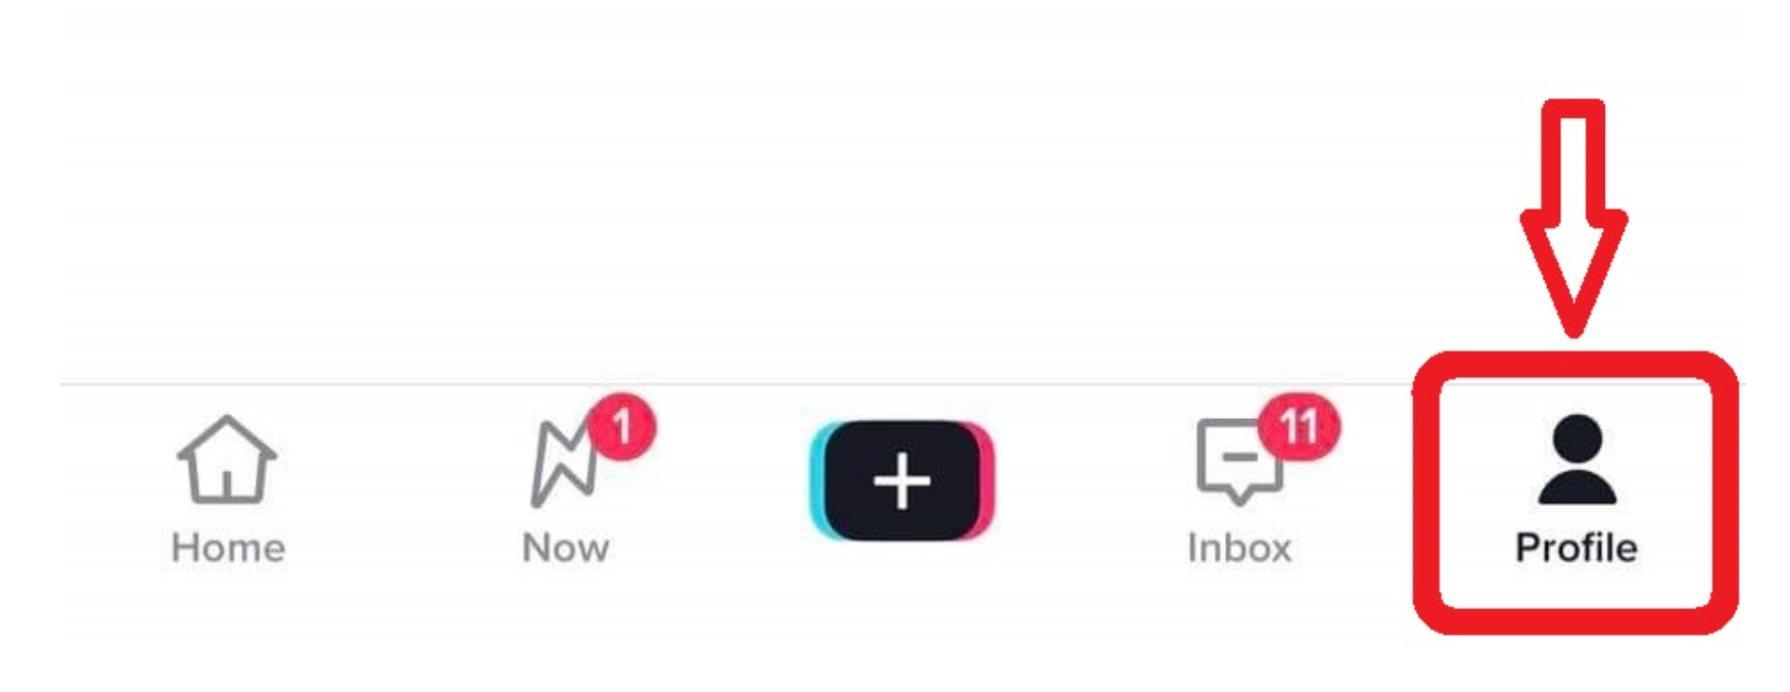 tiktok bottom border menu with an arrow pointing at a highlighted profile icon